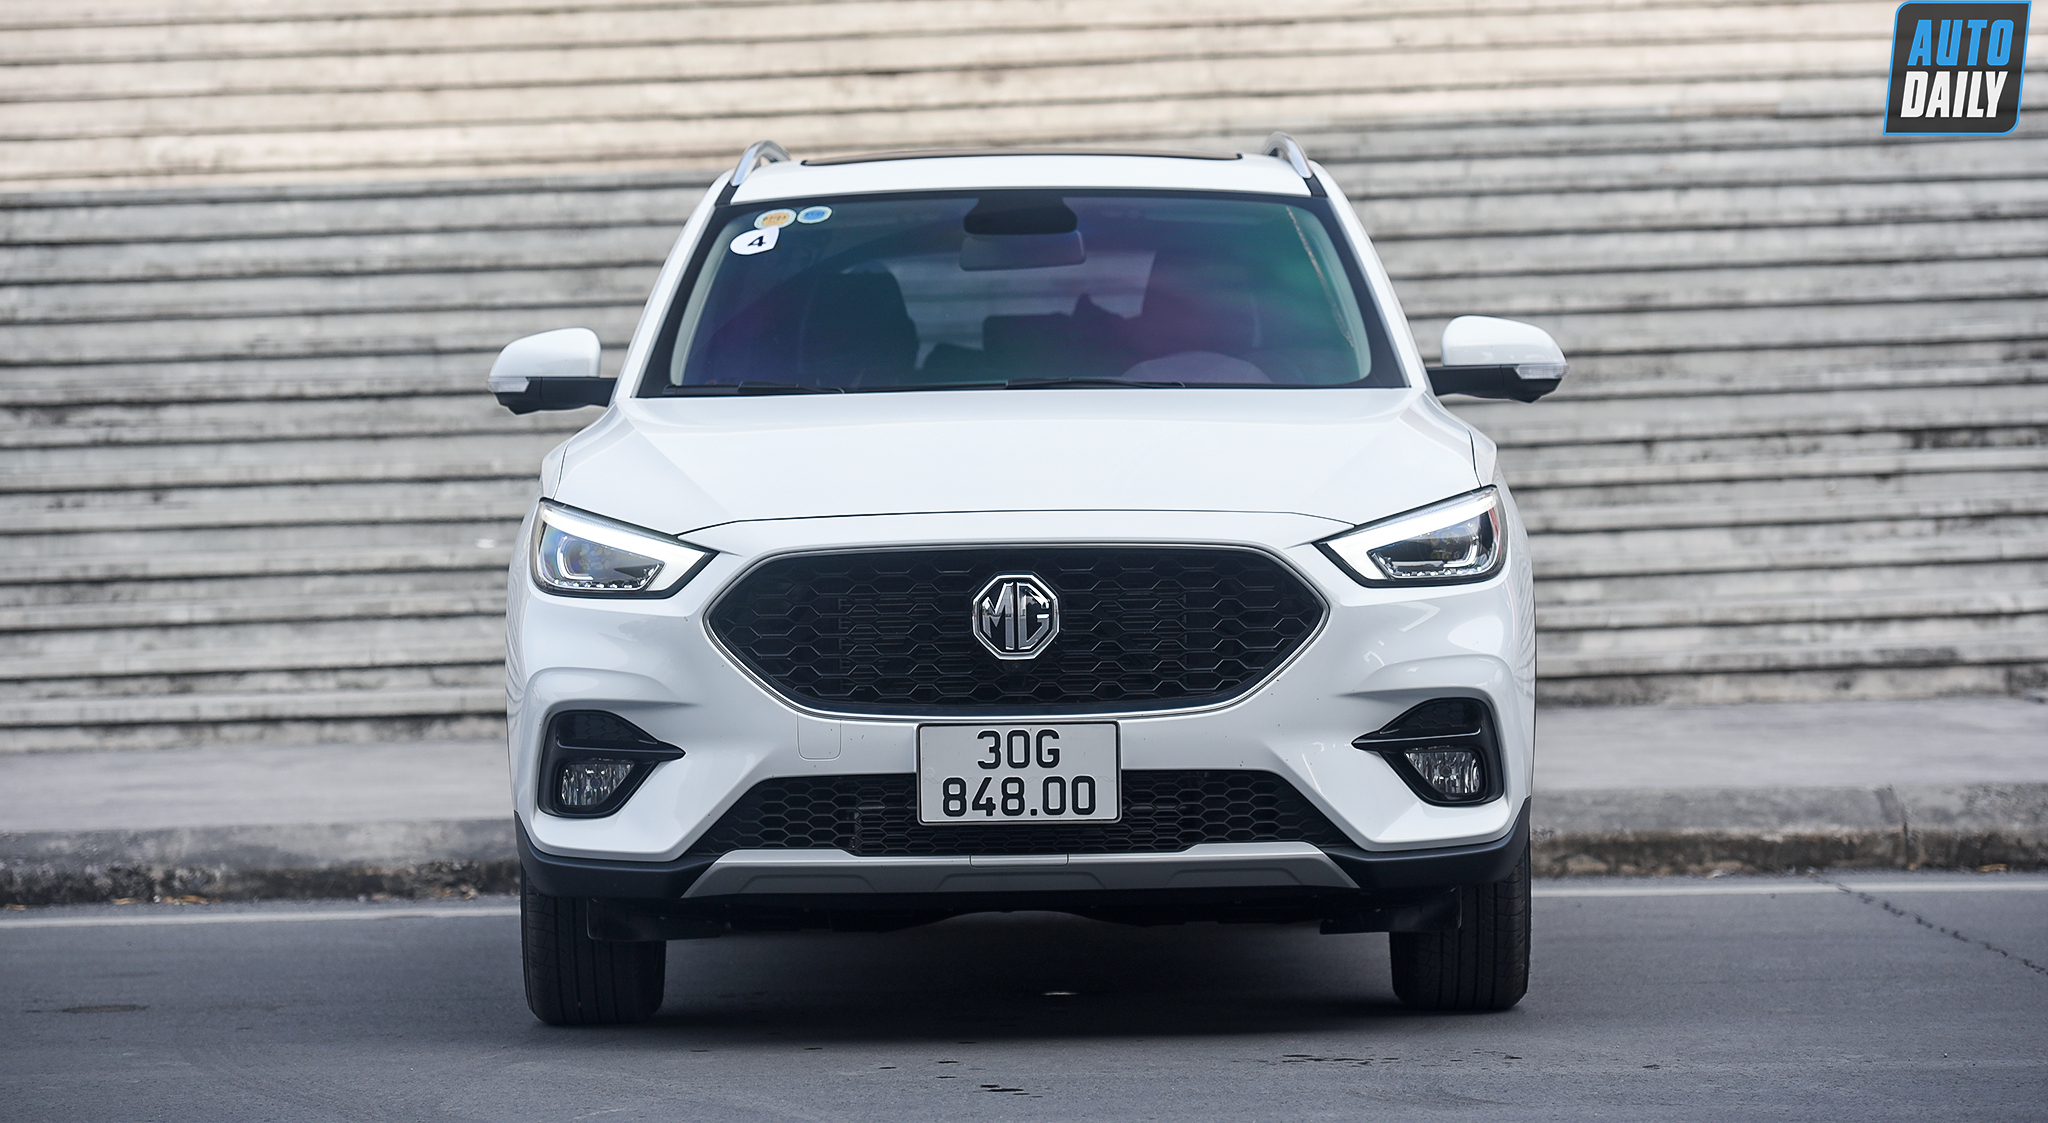 MG ZS 2021 evaluation: A reasonable choice of VND 600 million 2.jpg price range